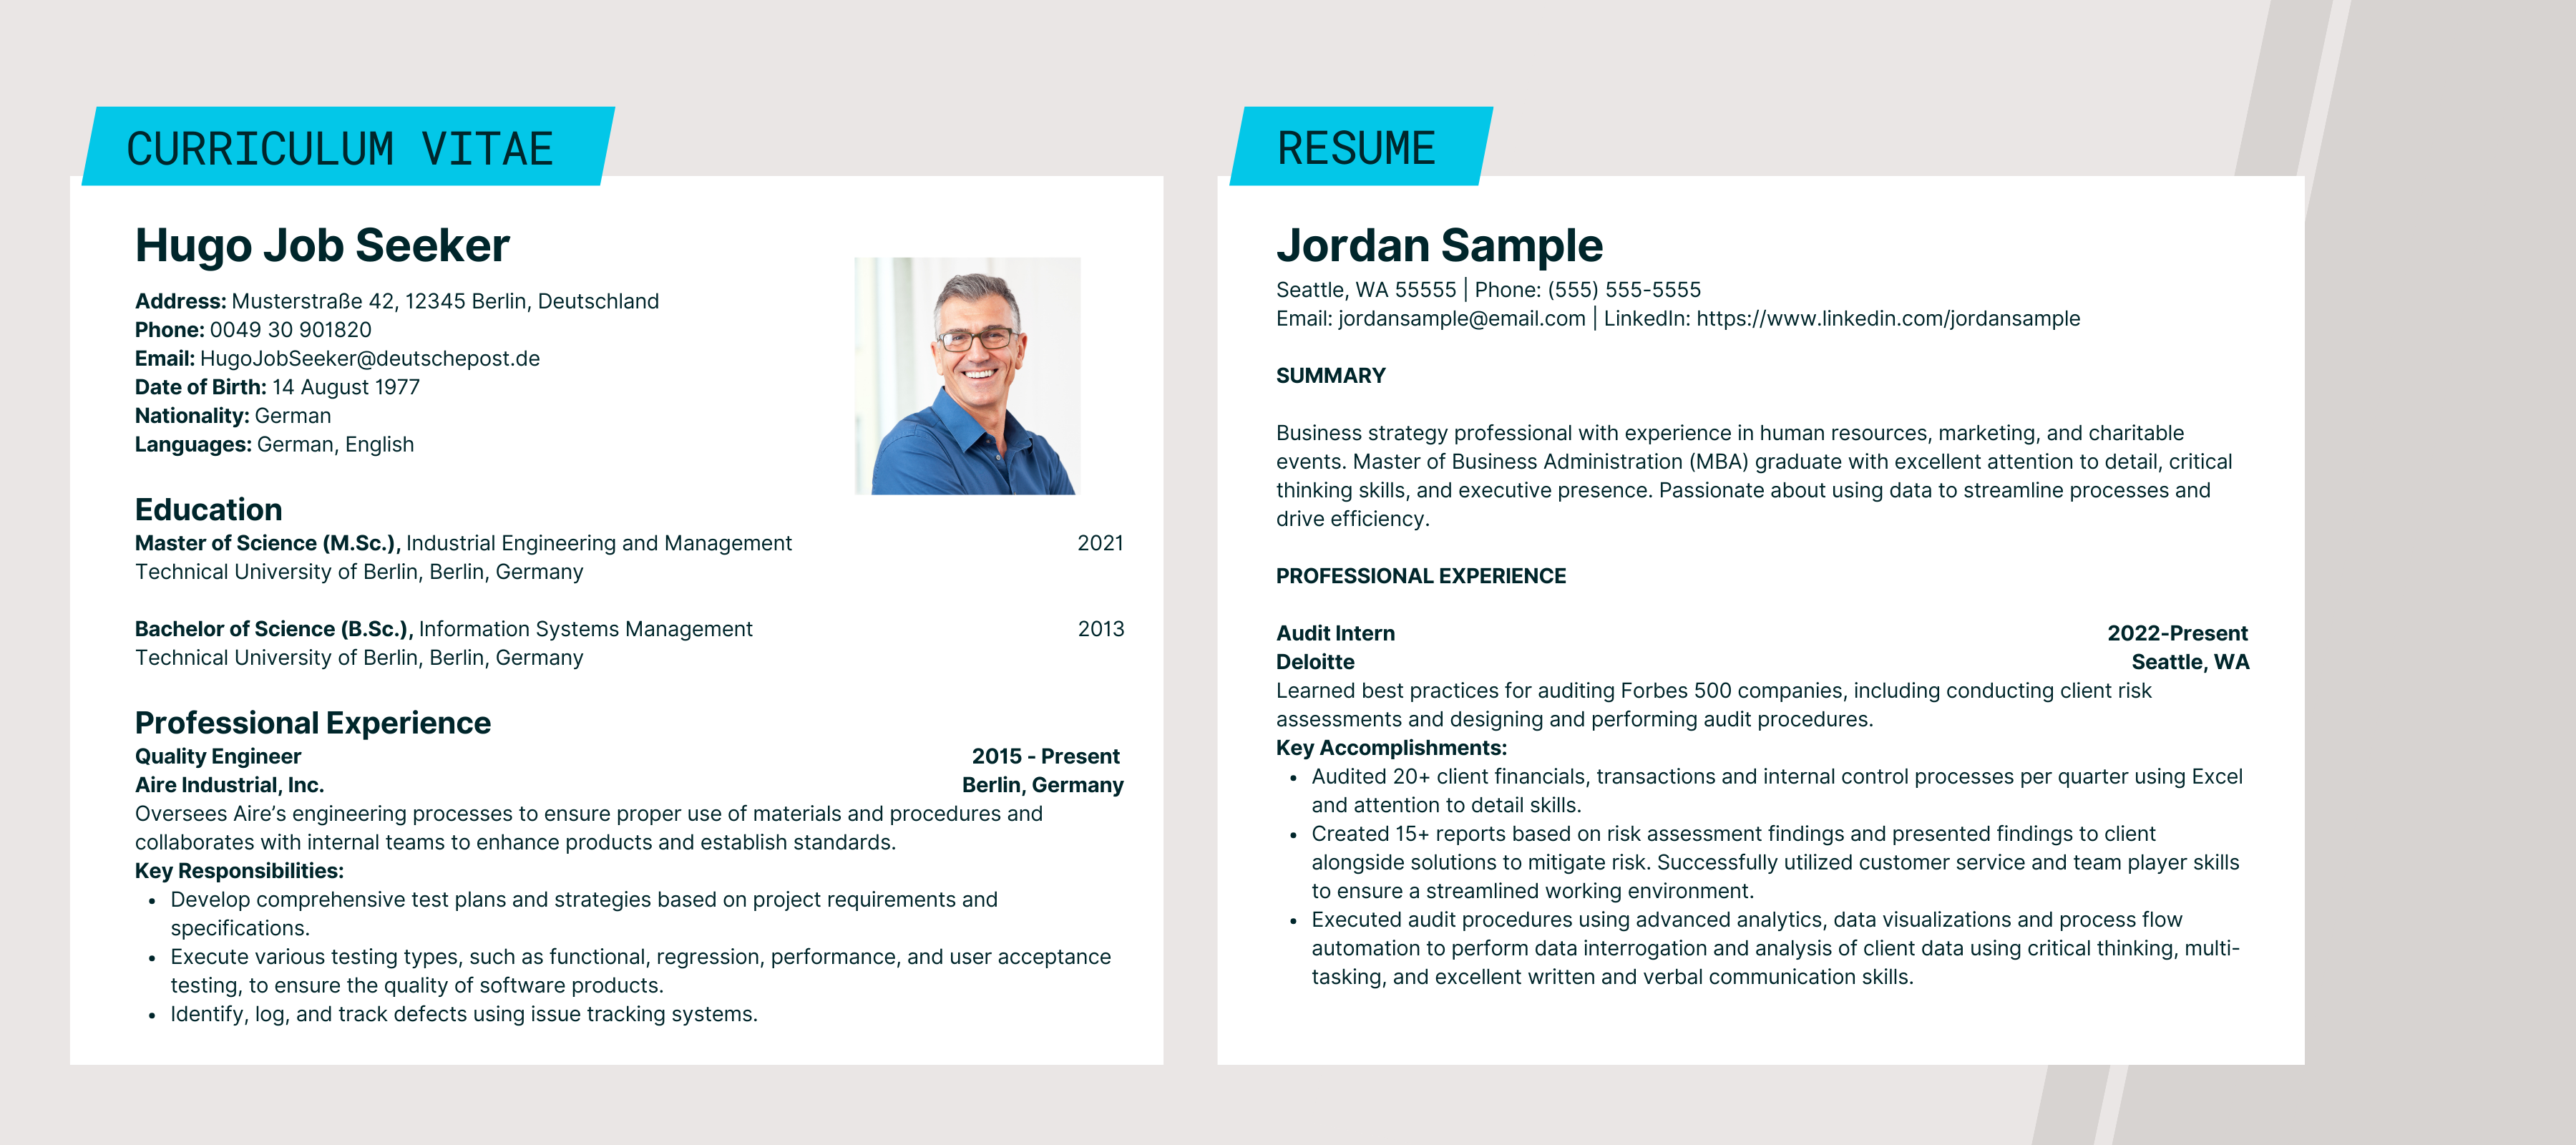 An image of the CV and Resume linked above.